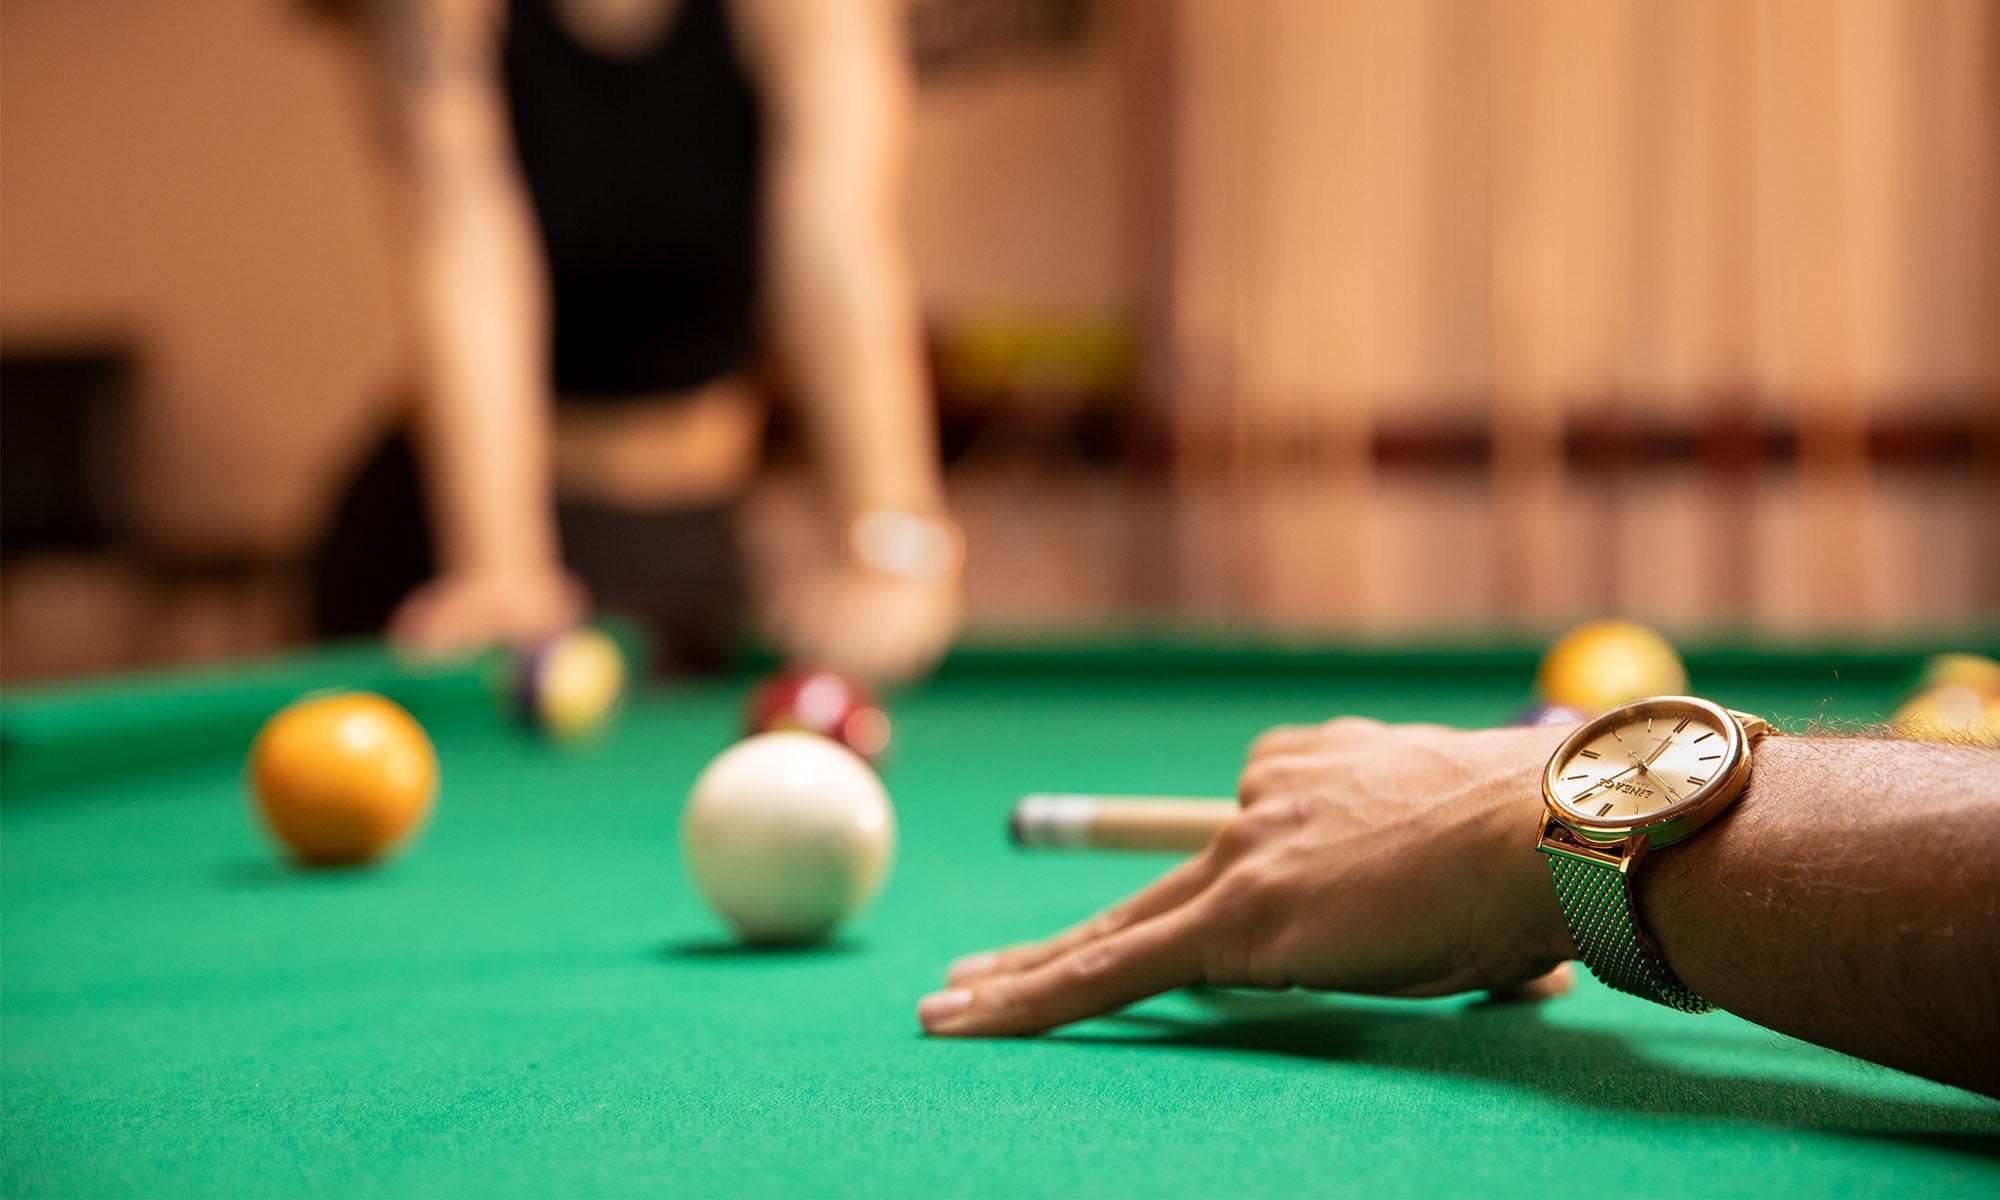 arm wearing gold watch lining up a shot on pool table with green felt